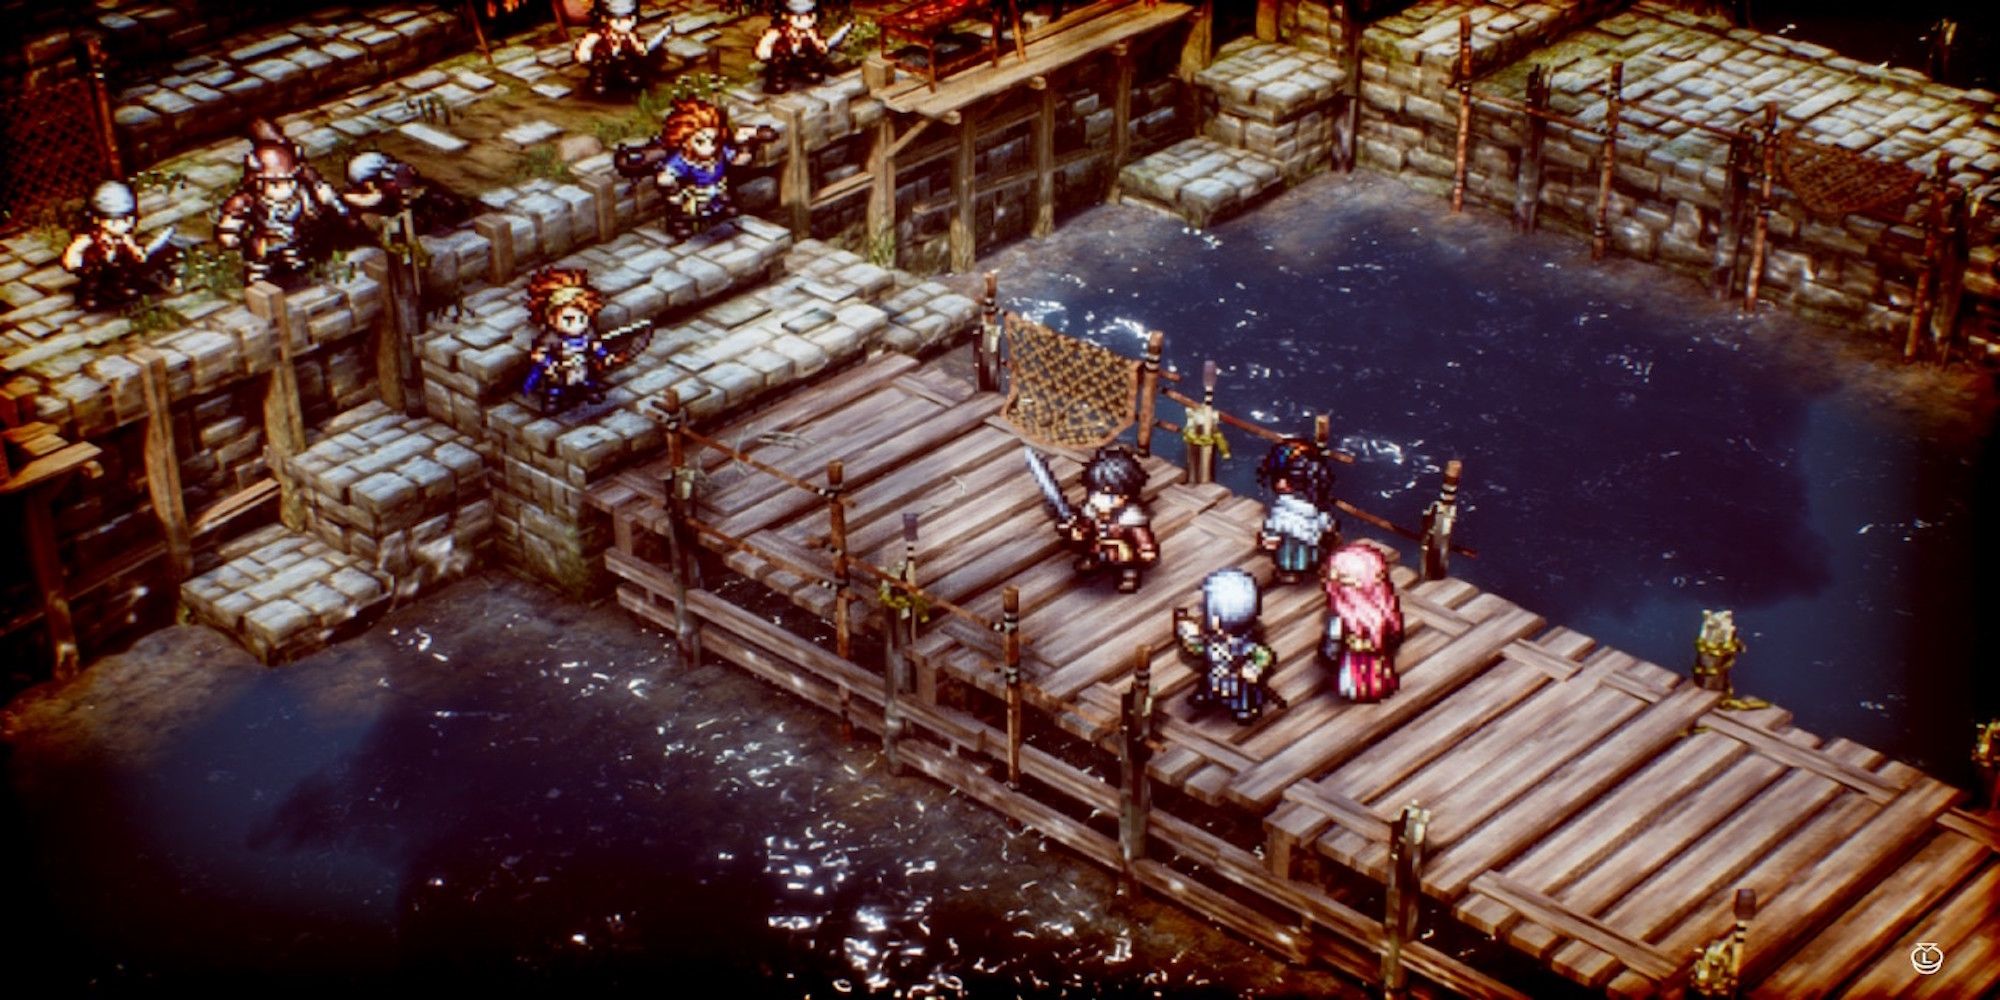 A scene featuring characters from Triangle Strategy